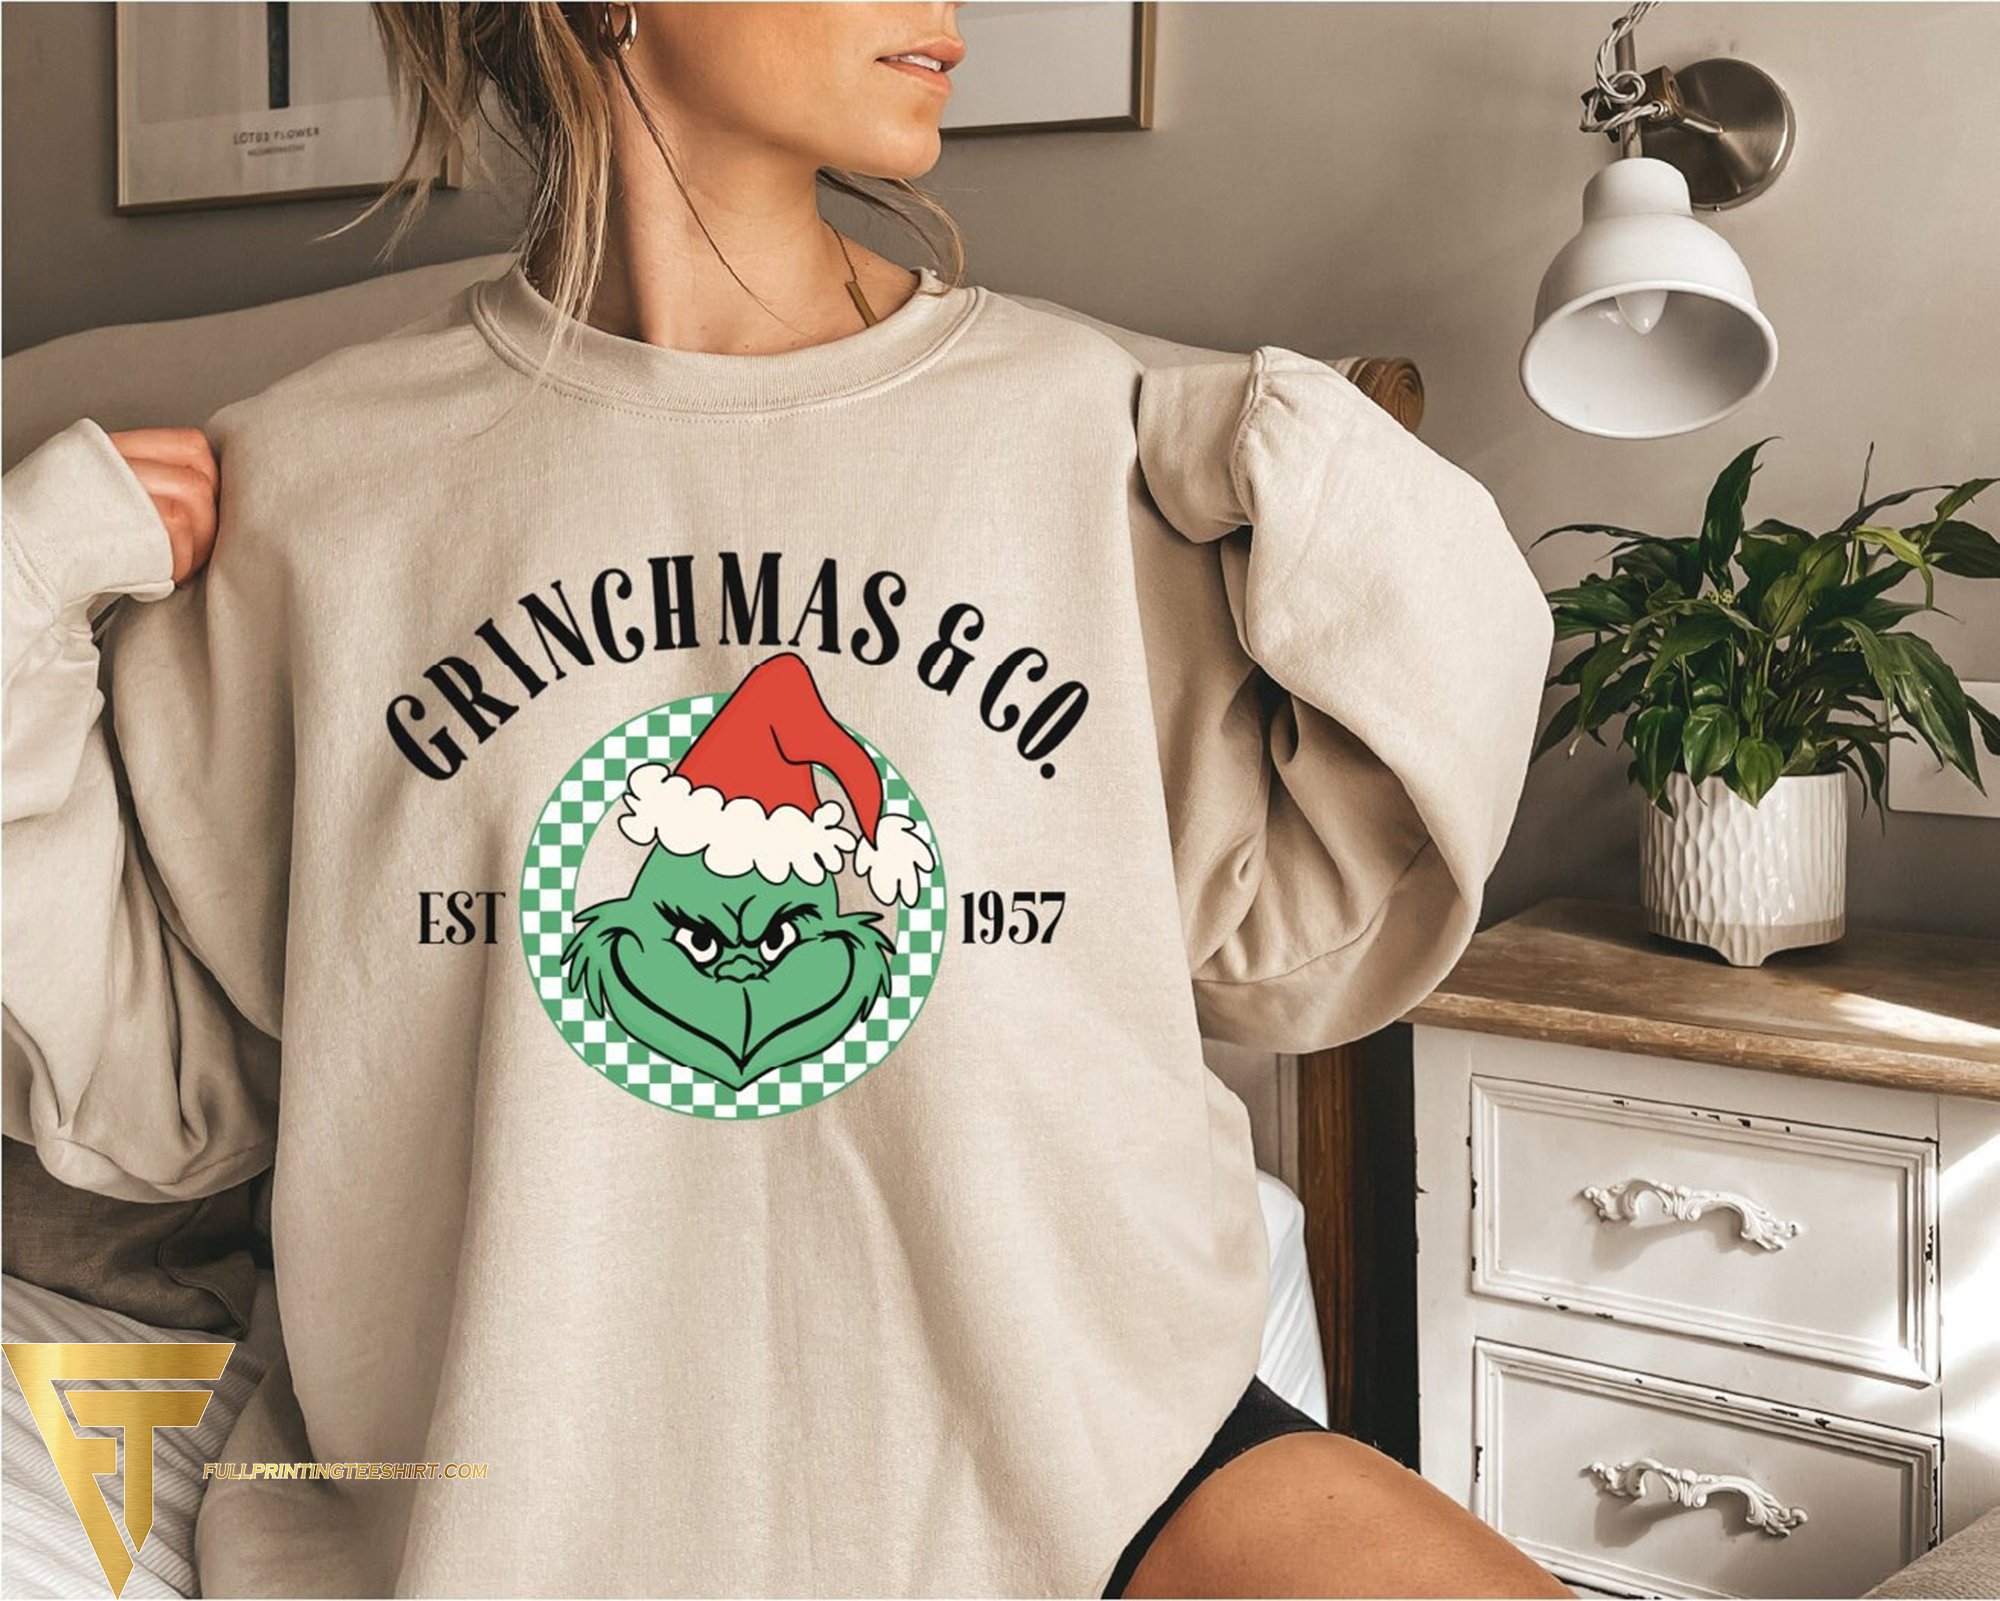 Get in the Holiday Spirit with Grinchy Sweatshirts and Sweaters The Perfect Christmas Gift Ideas